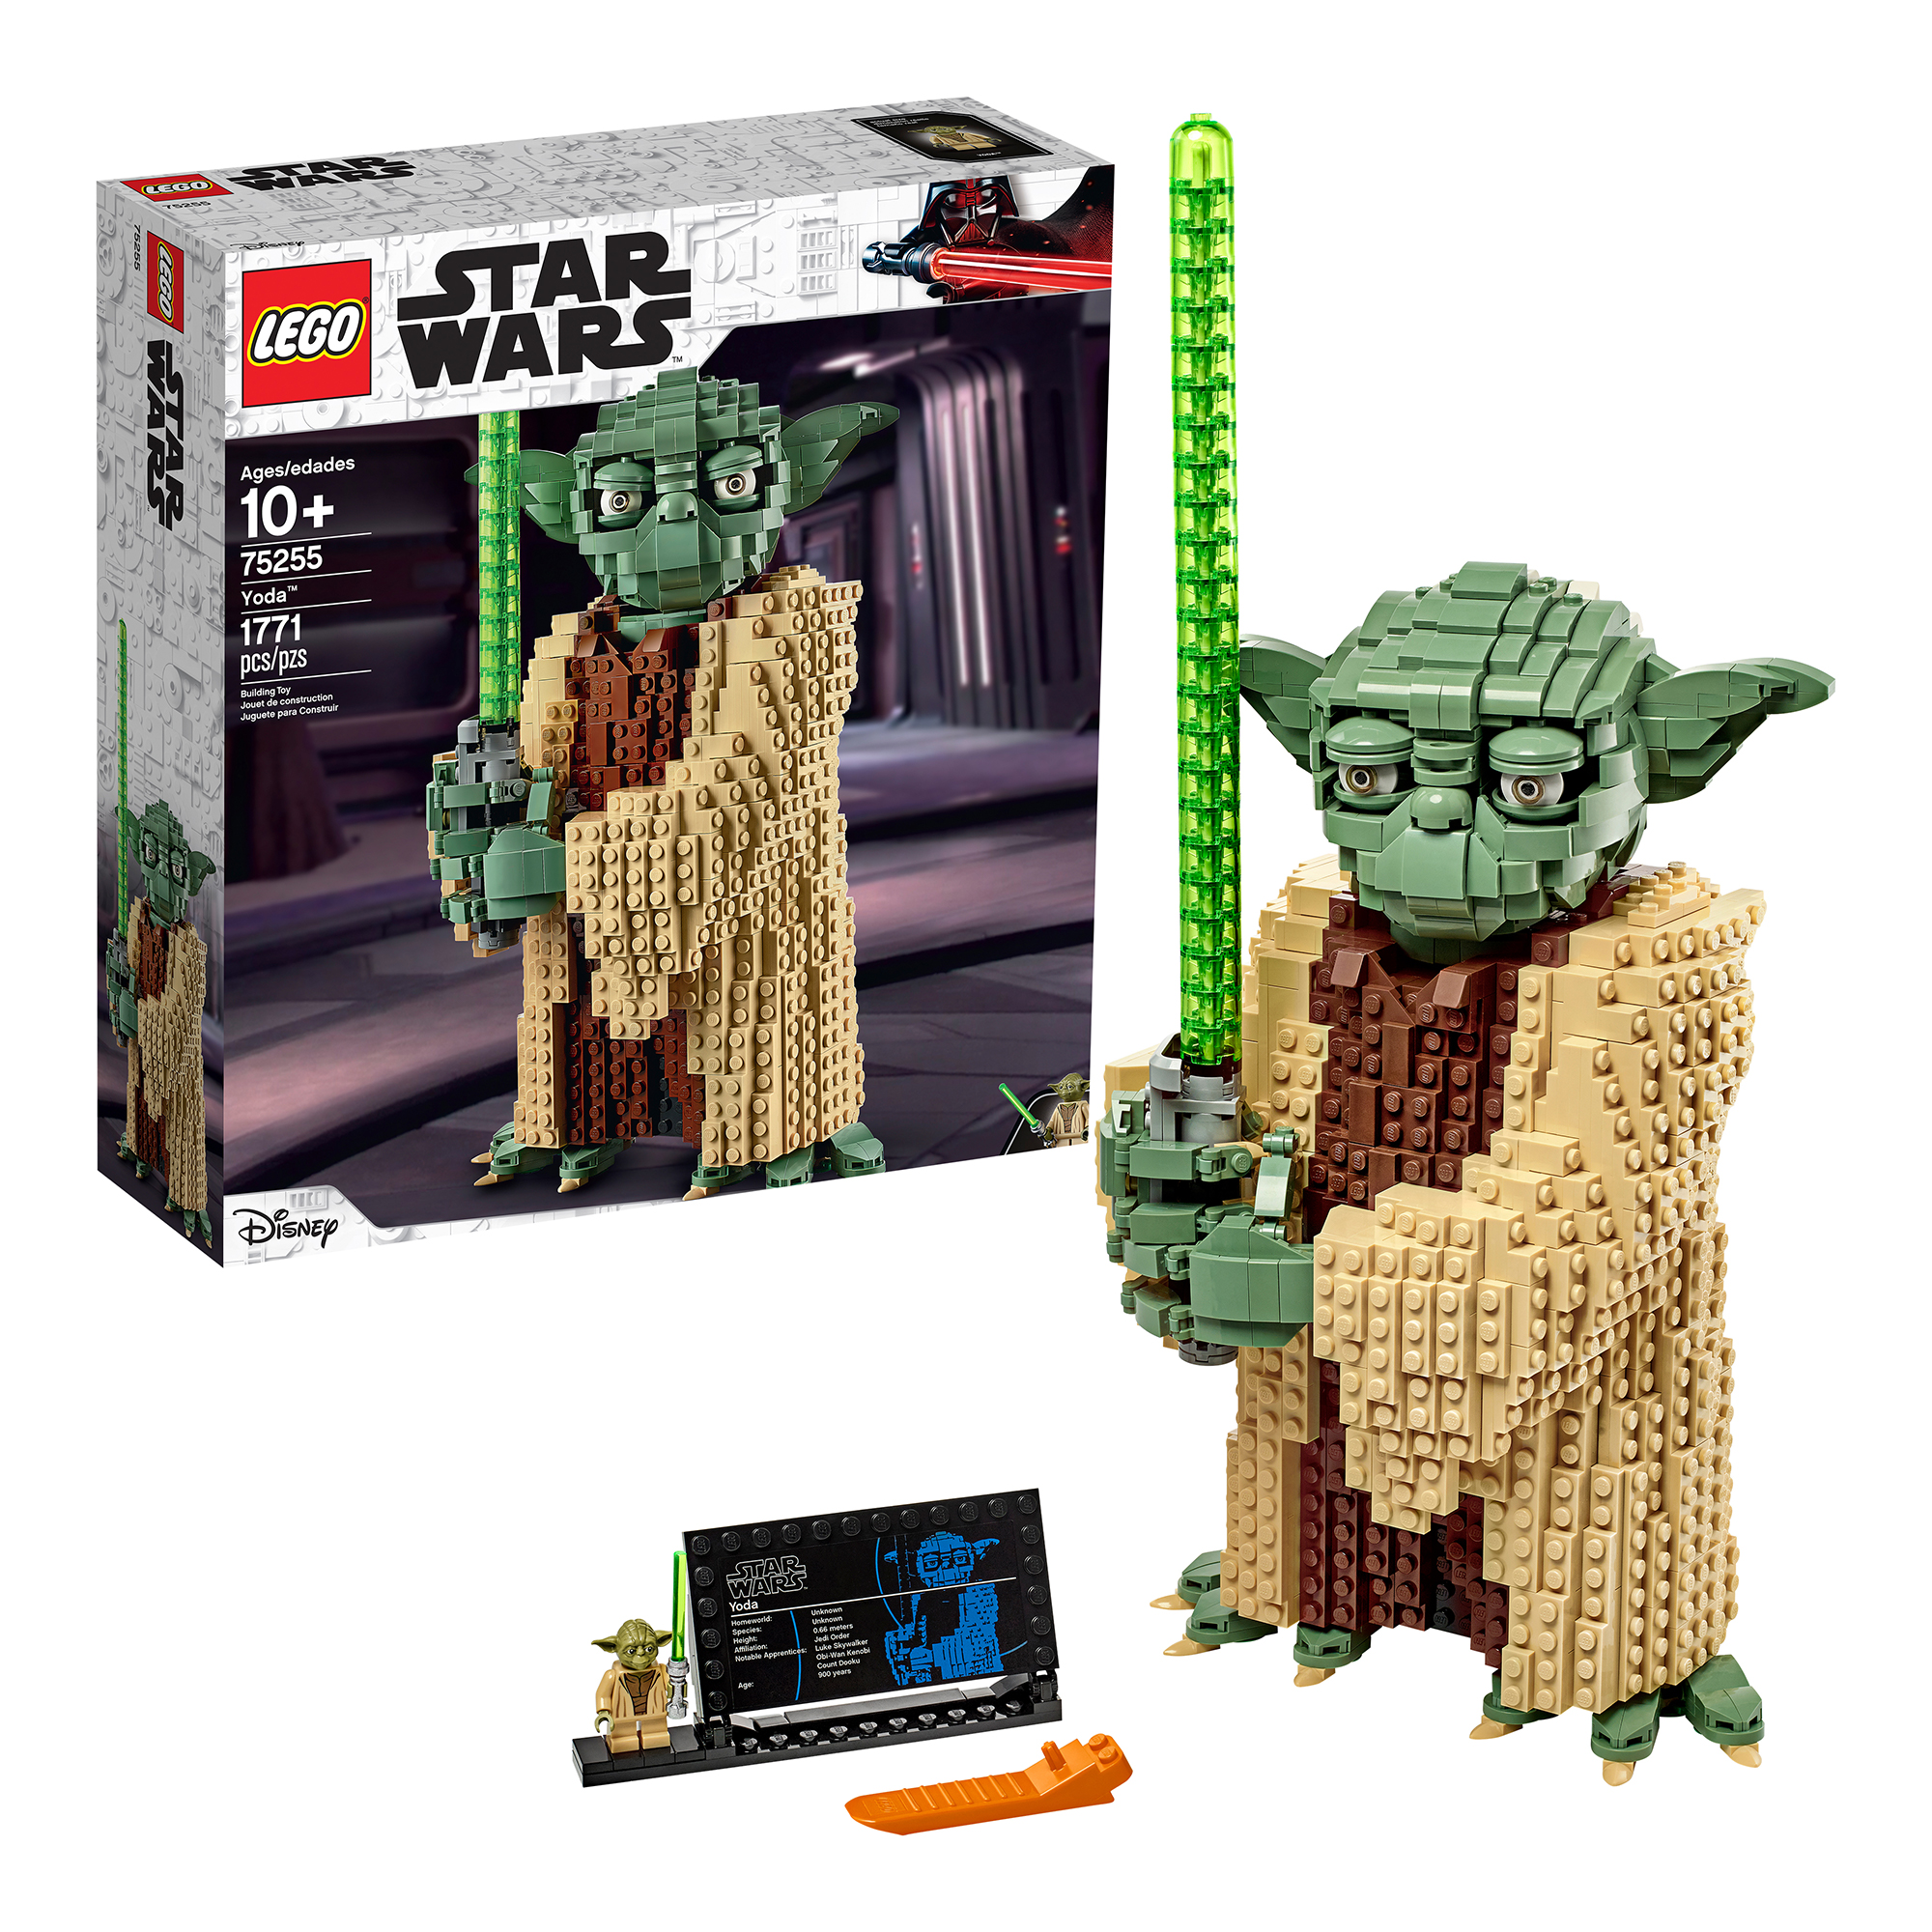 LEGO Star Wars: Attack of the Clones Yoda 75255 Building Toy Set (1,771 Pieces) - image 5 of 10